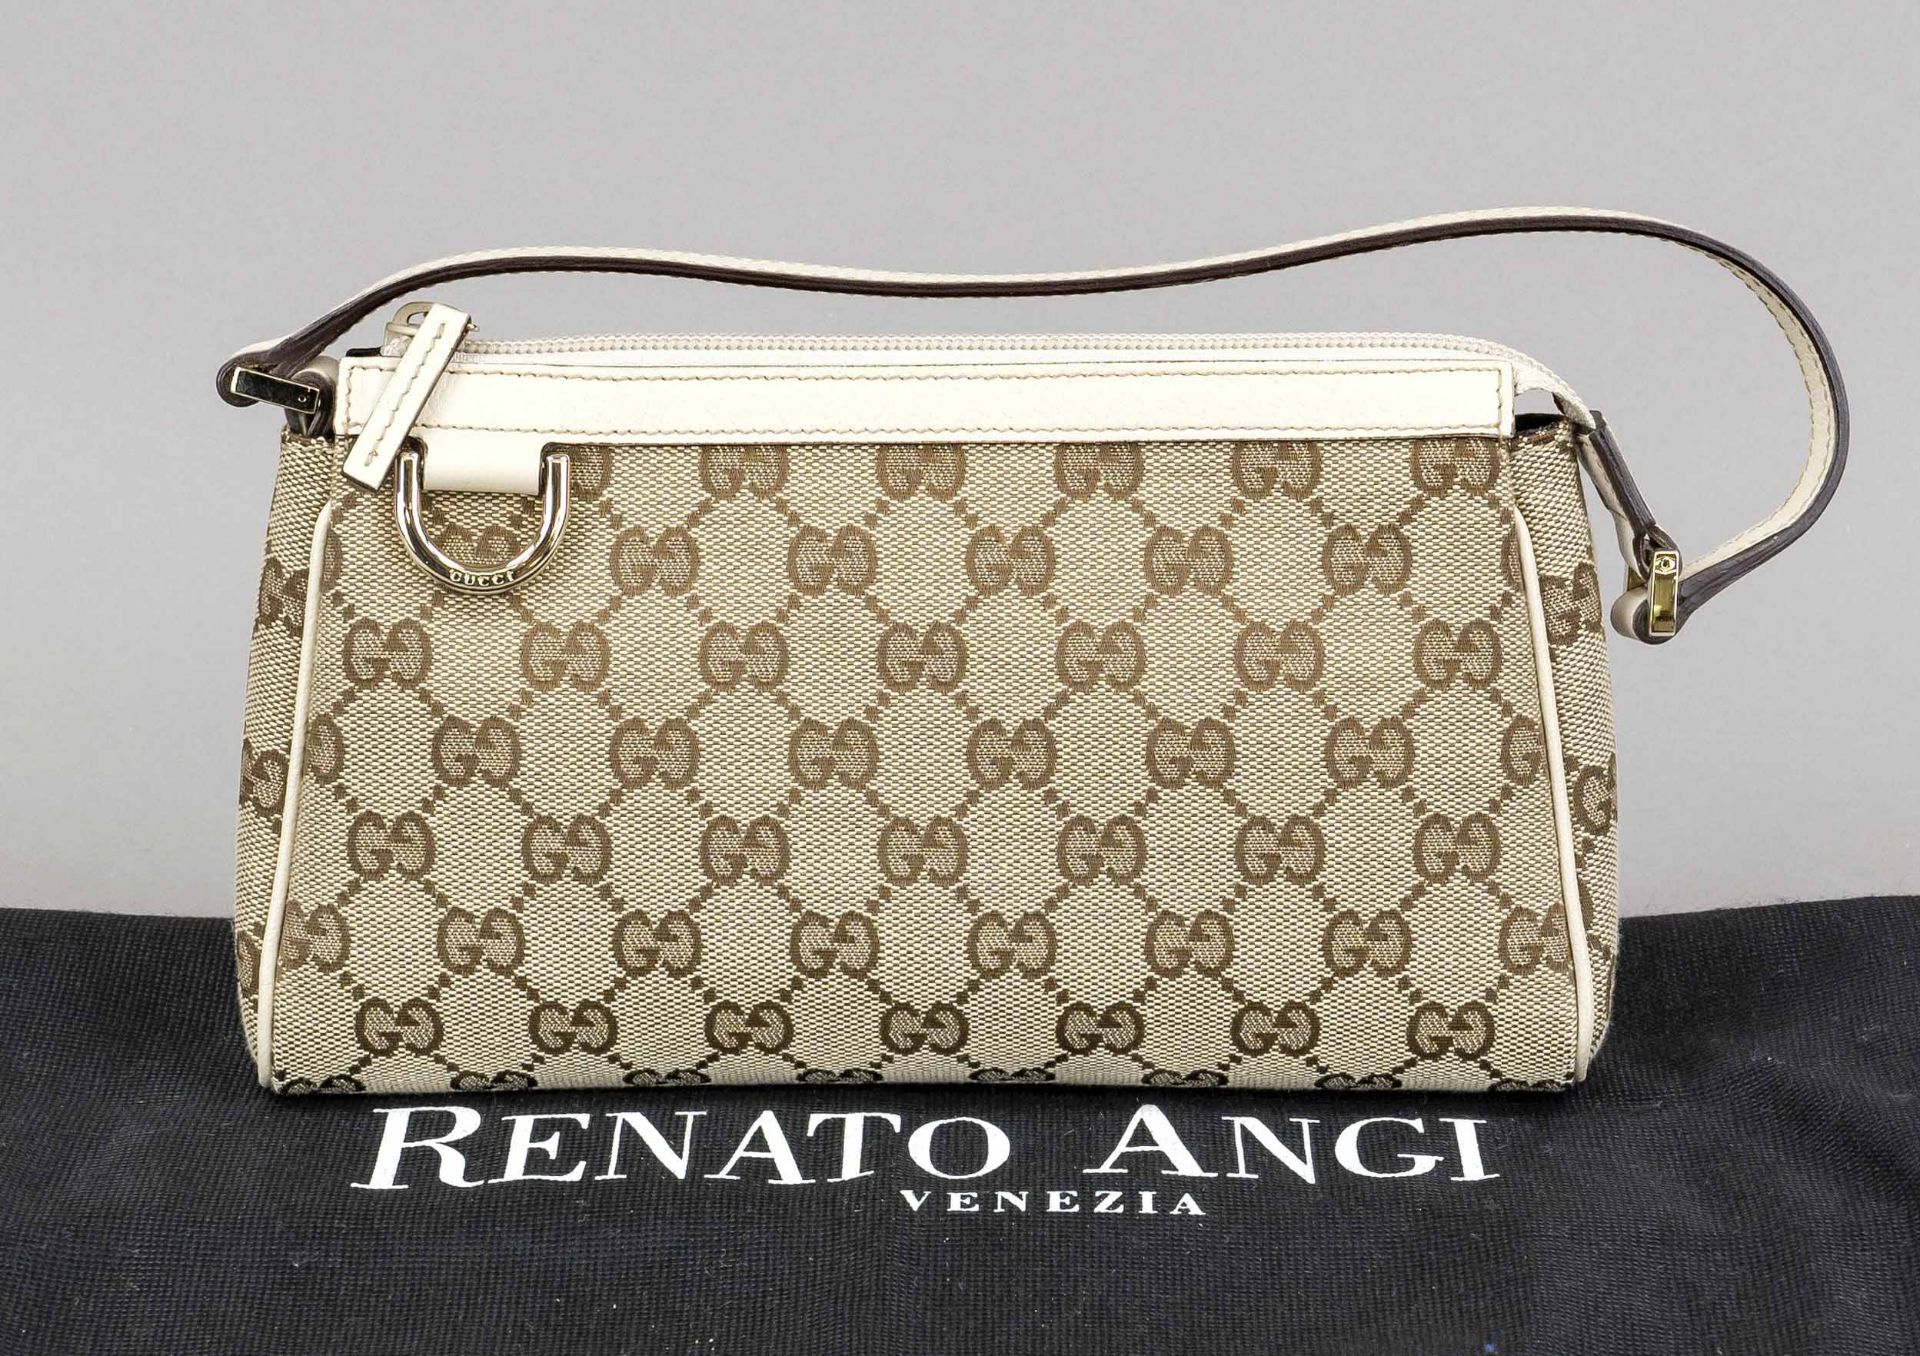 Gucci, Monogram Canvas D-Ring Cosmetic Case, sand-colored canvas with GG Supreme logo in repeat